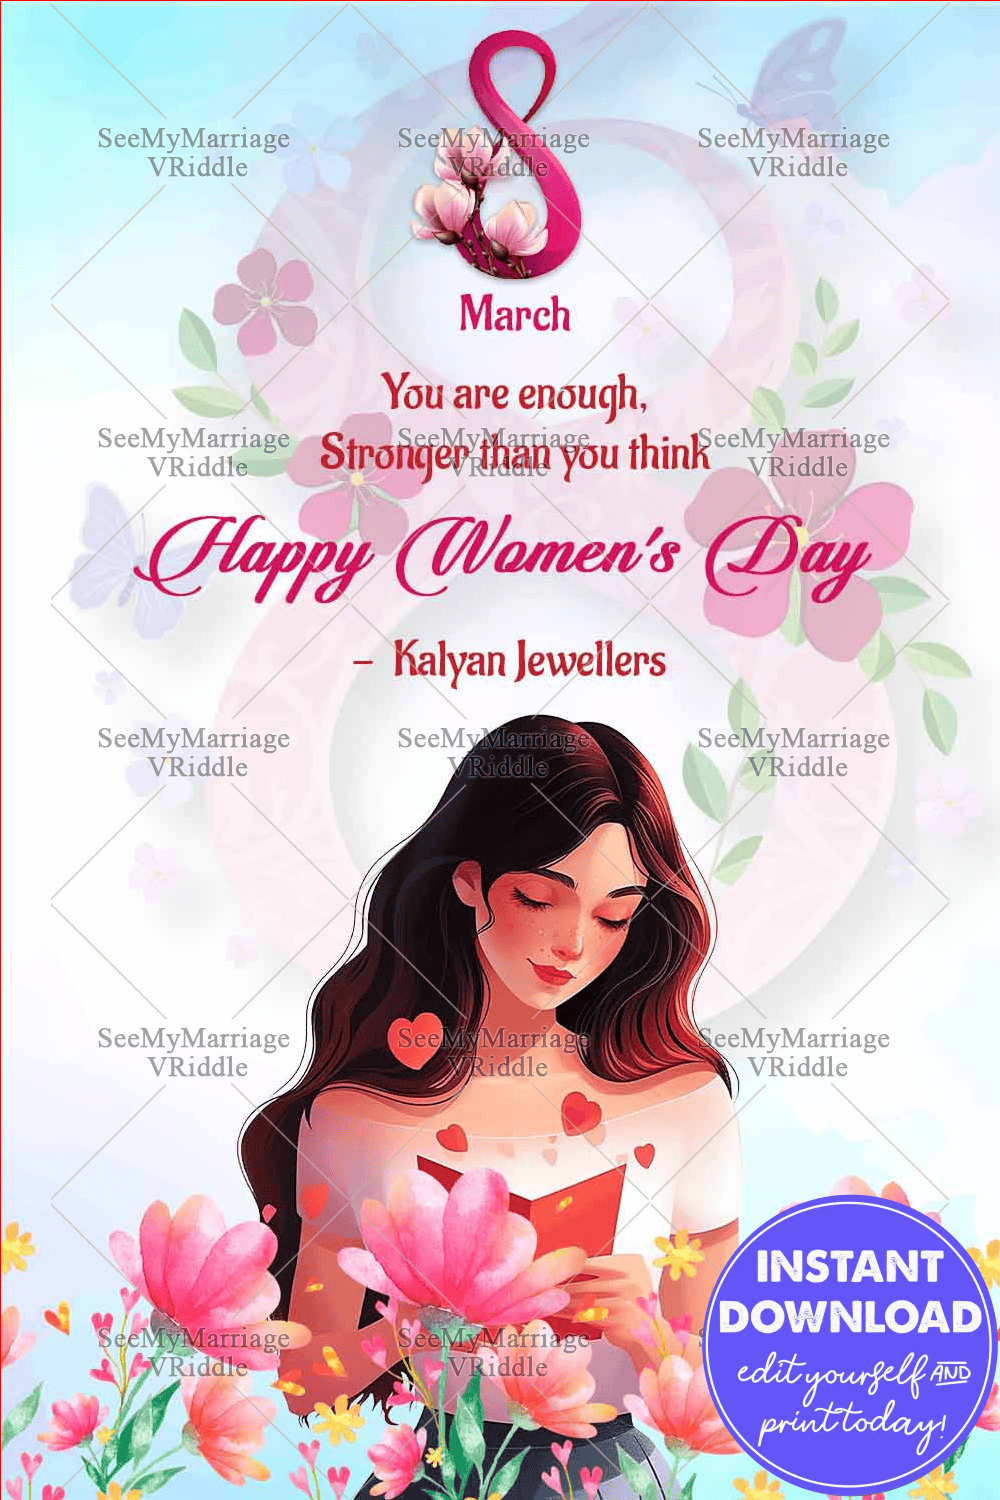 Woman's-Day-Greetings_stronger-than-you-think